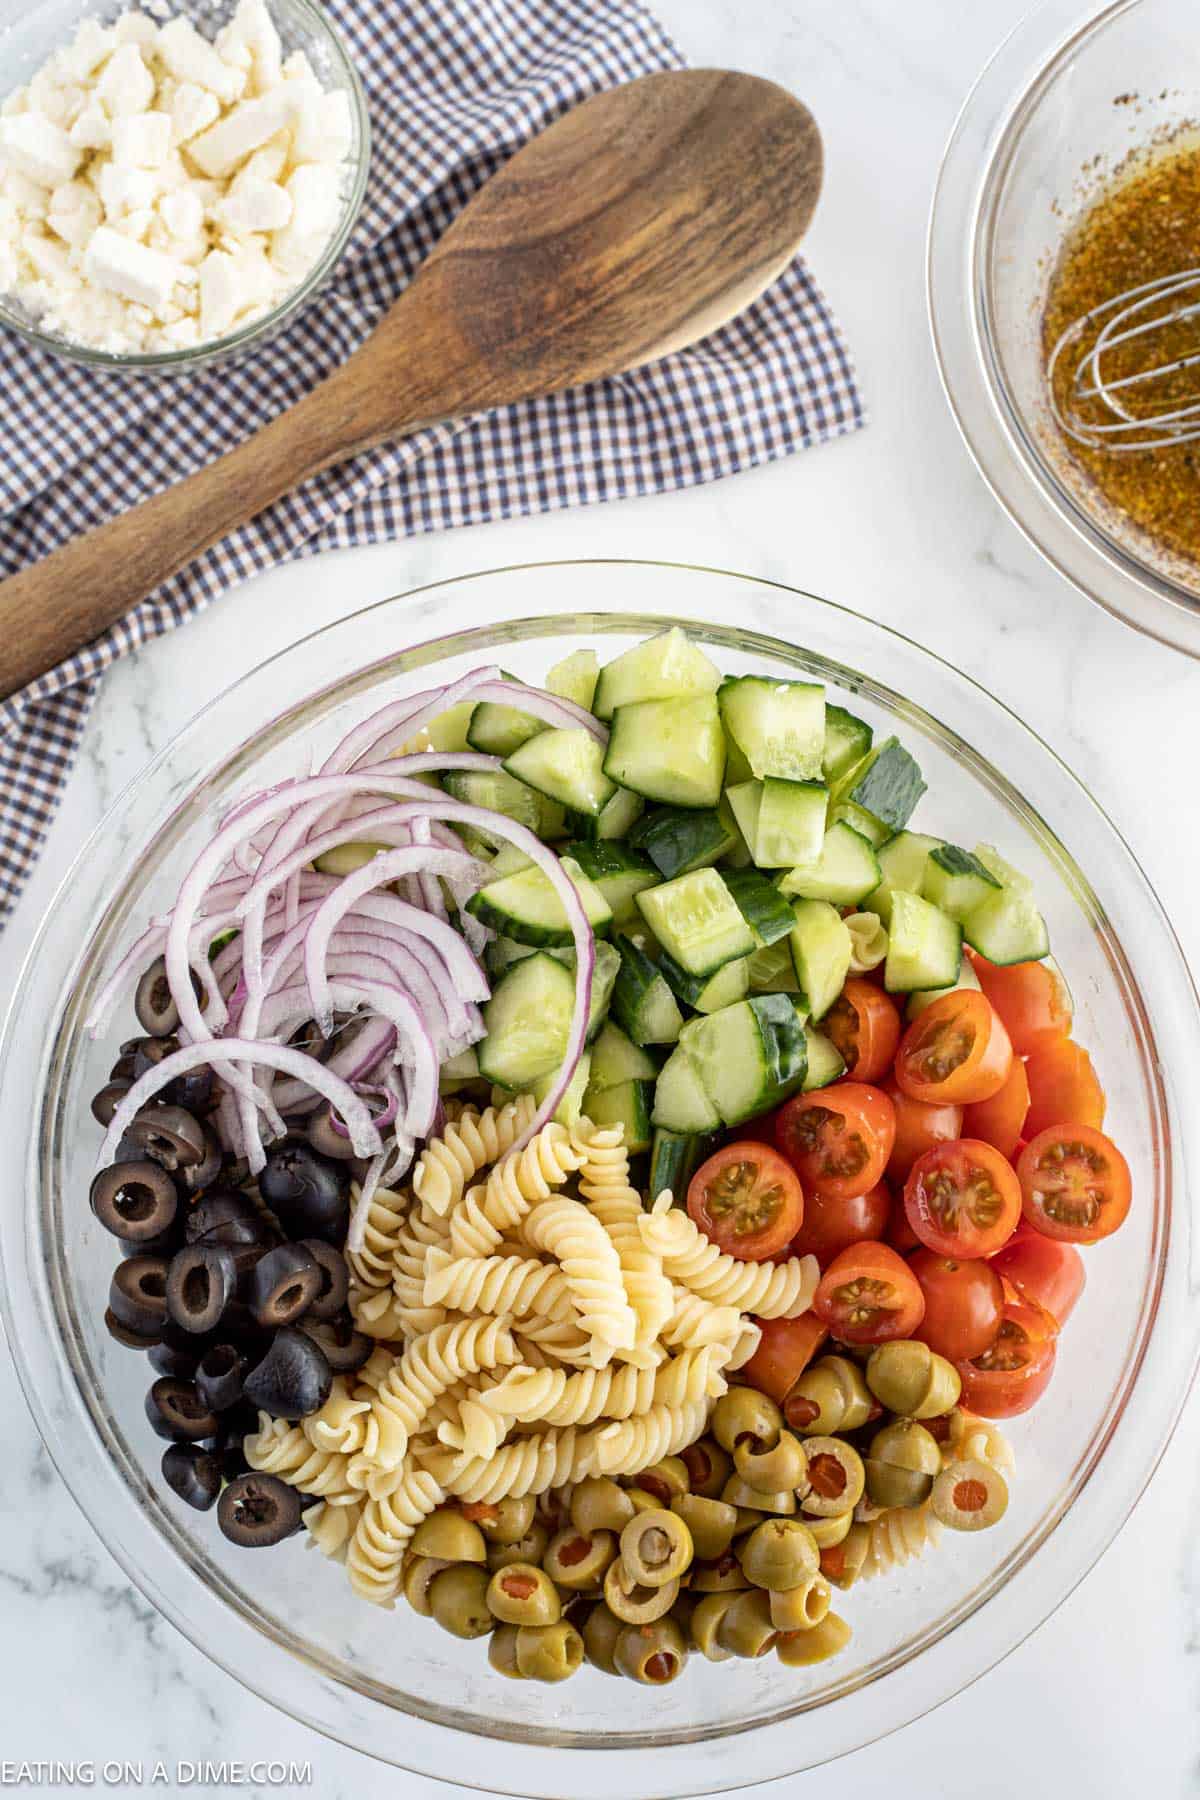 Add in the red onions, slice black olives, cucumbers, cherry tomatoes, olives with the pasta in a bowl